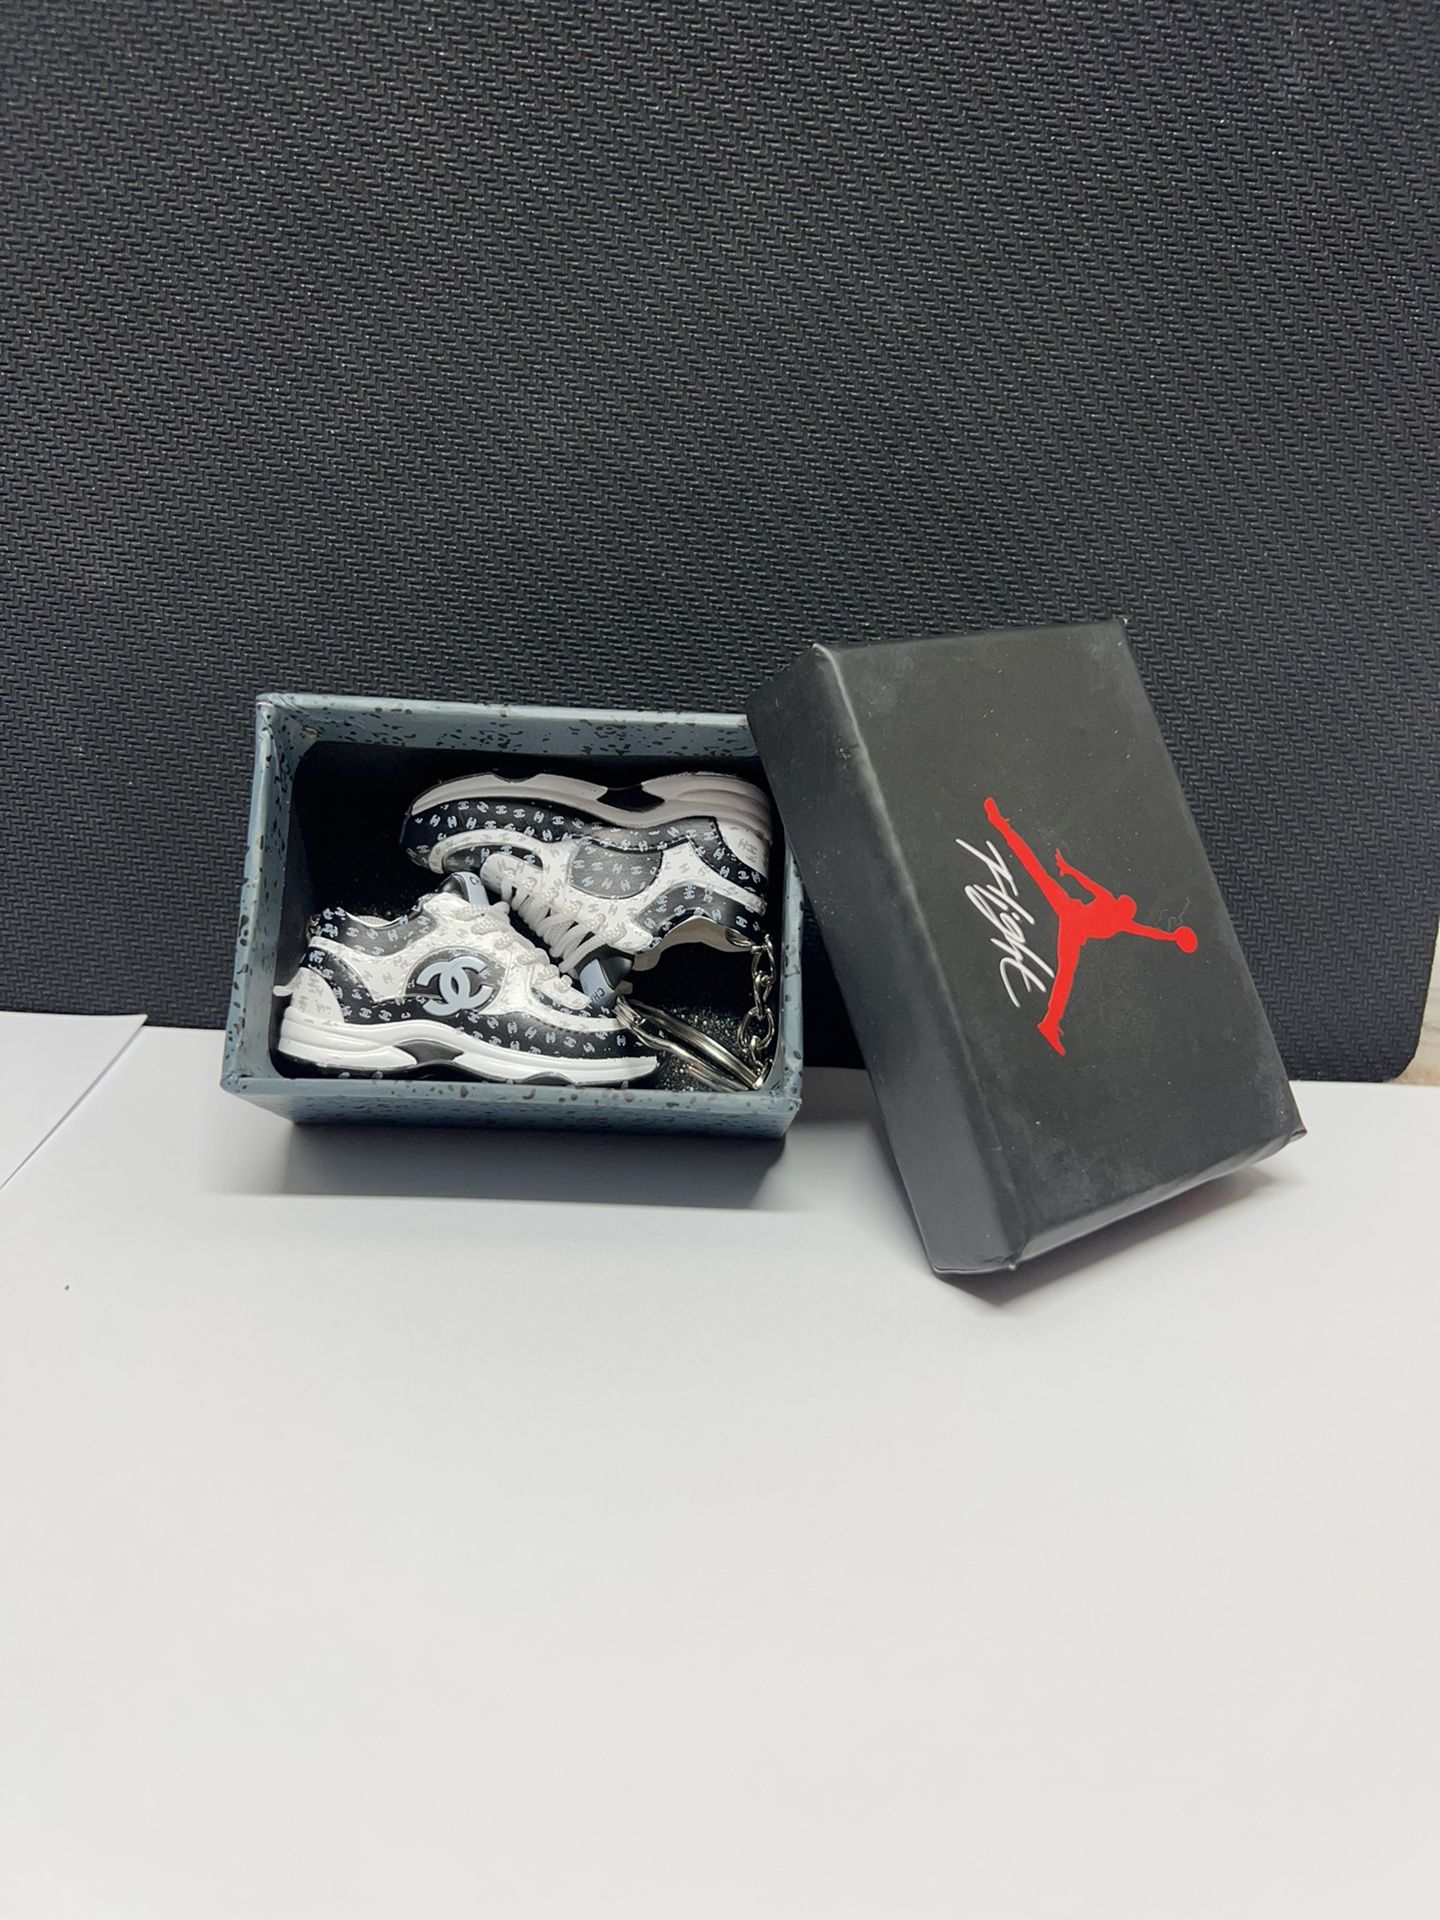 Channel Sneaker Mini 3d Keychain/Keyring Free Box and Bag Offer